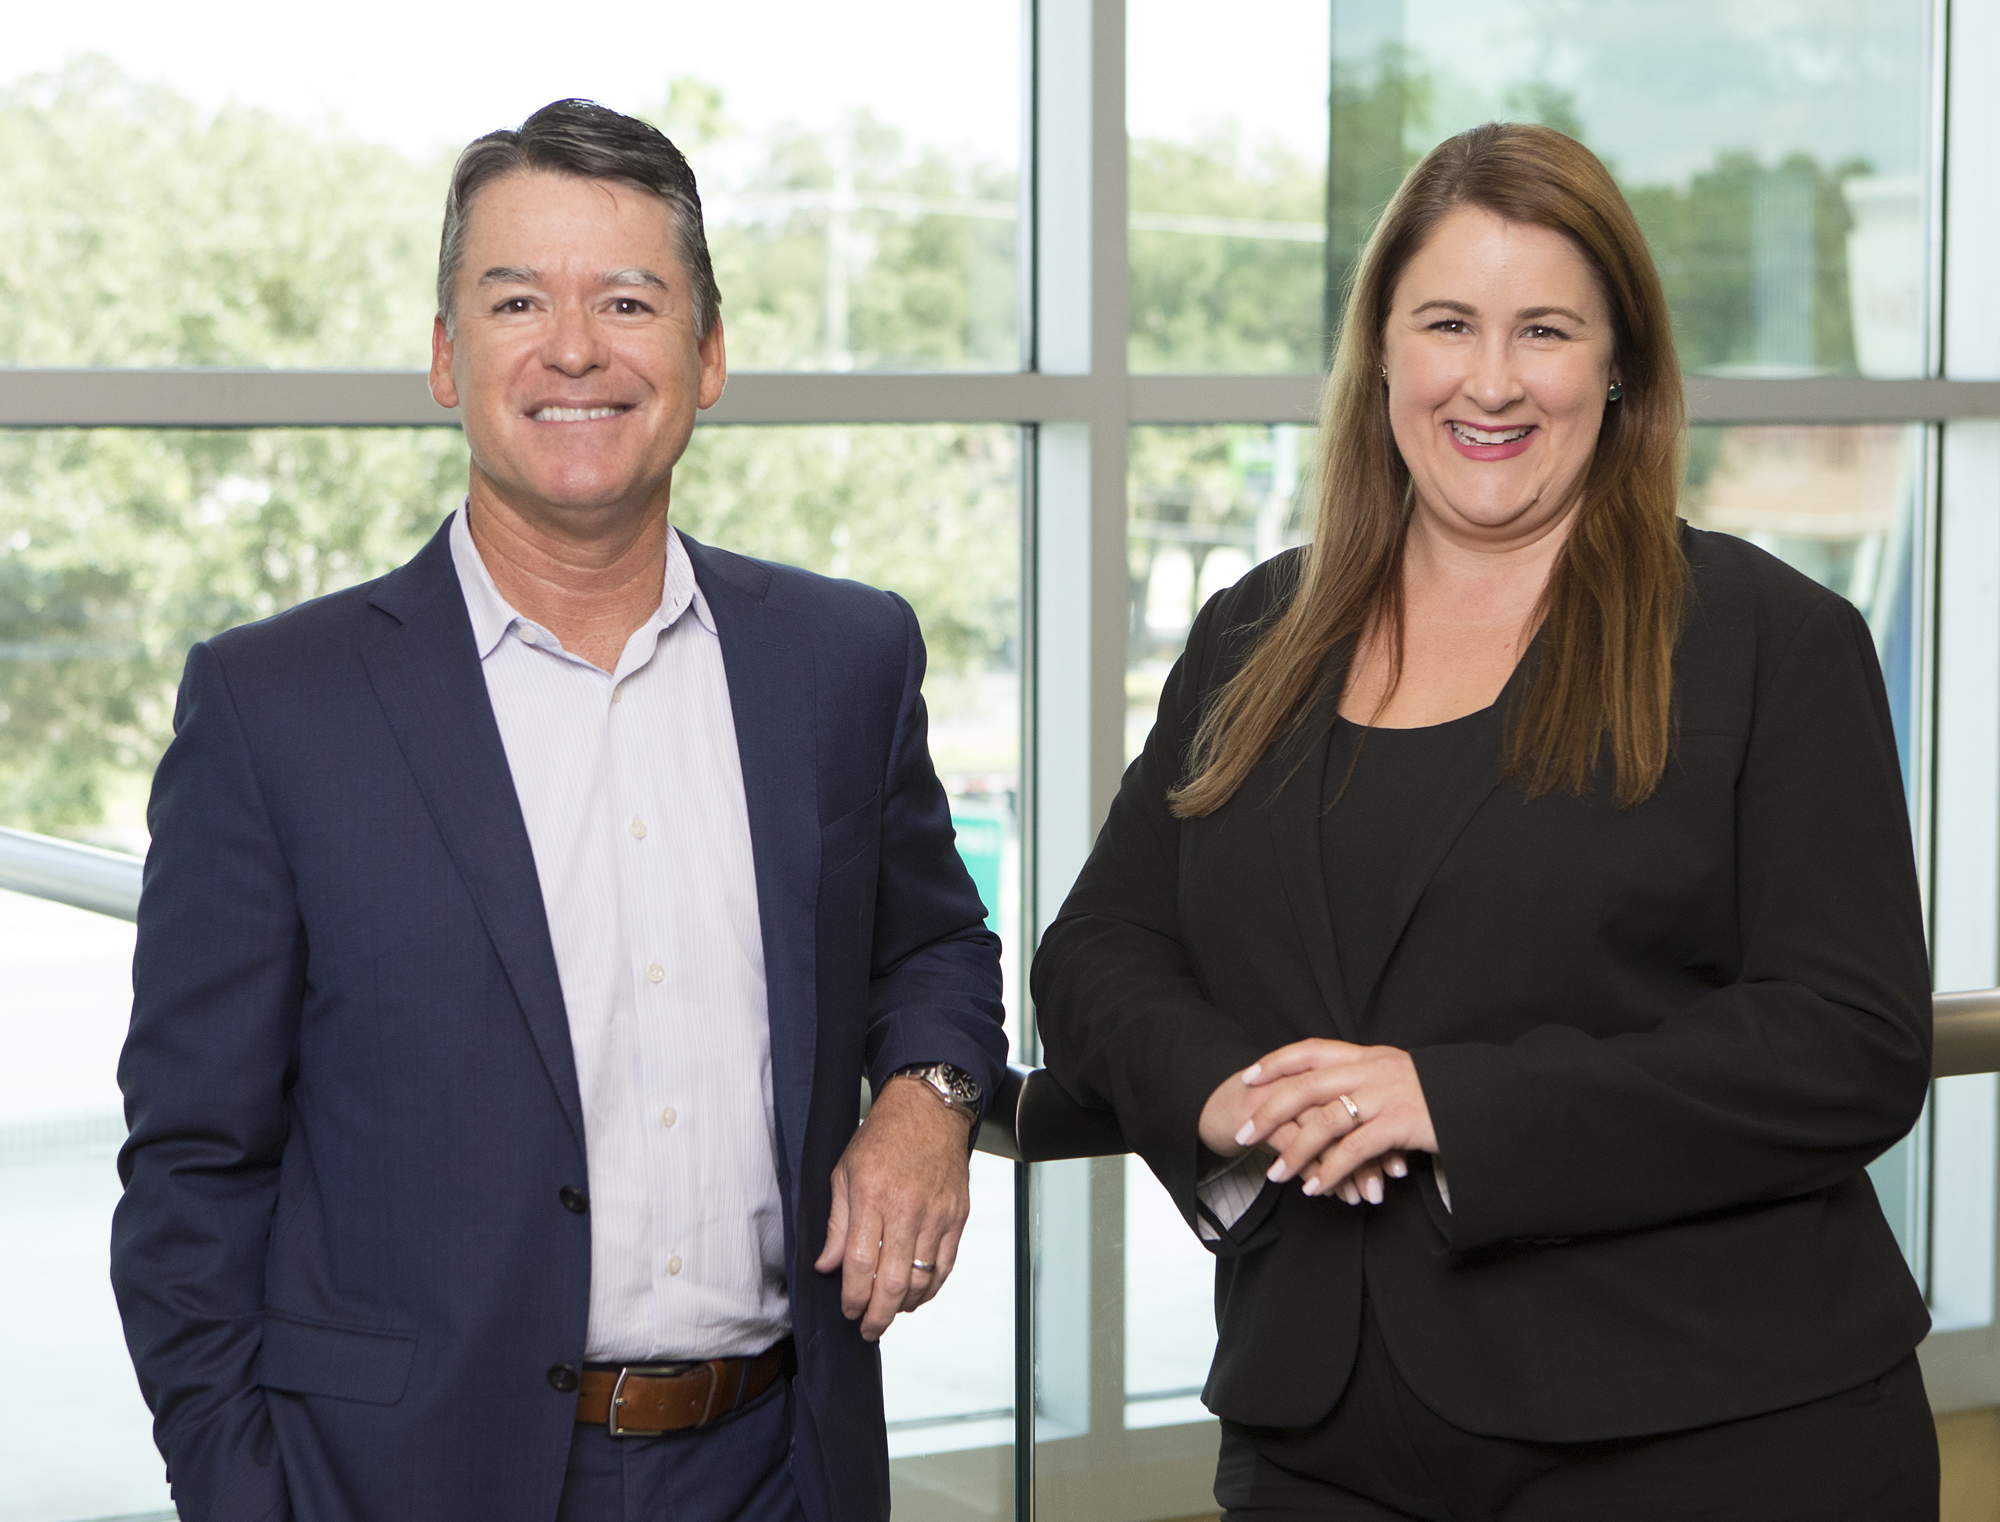 File. First Citrus Bank CEO Jack Barrett and Chief Banking Officer Jessica Hornof have led a surge at the 20-year-old bank.